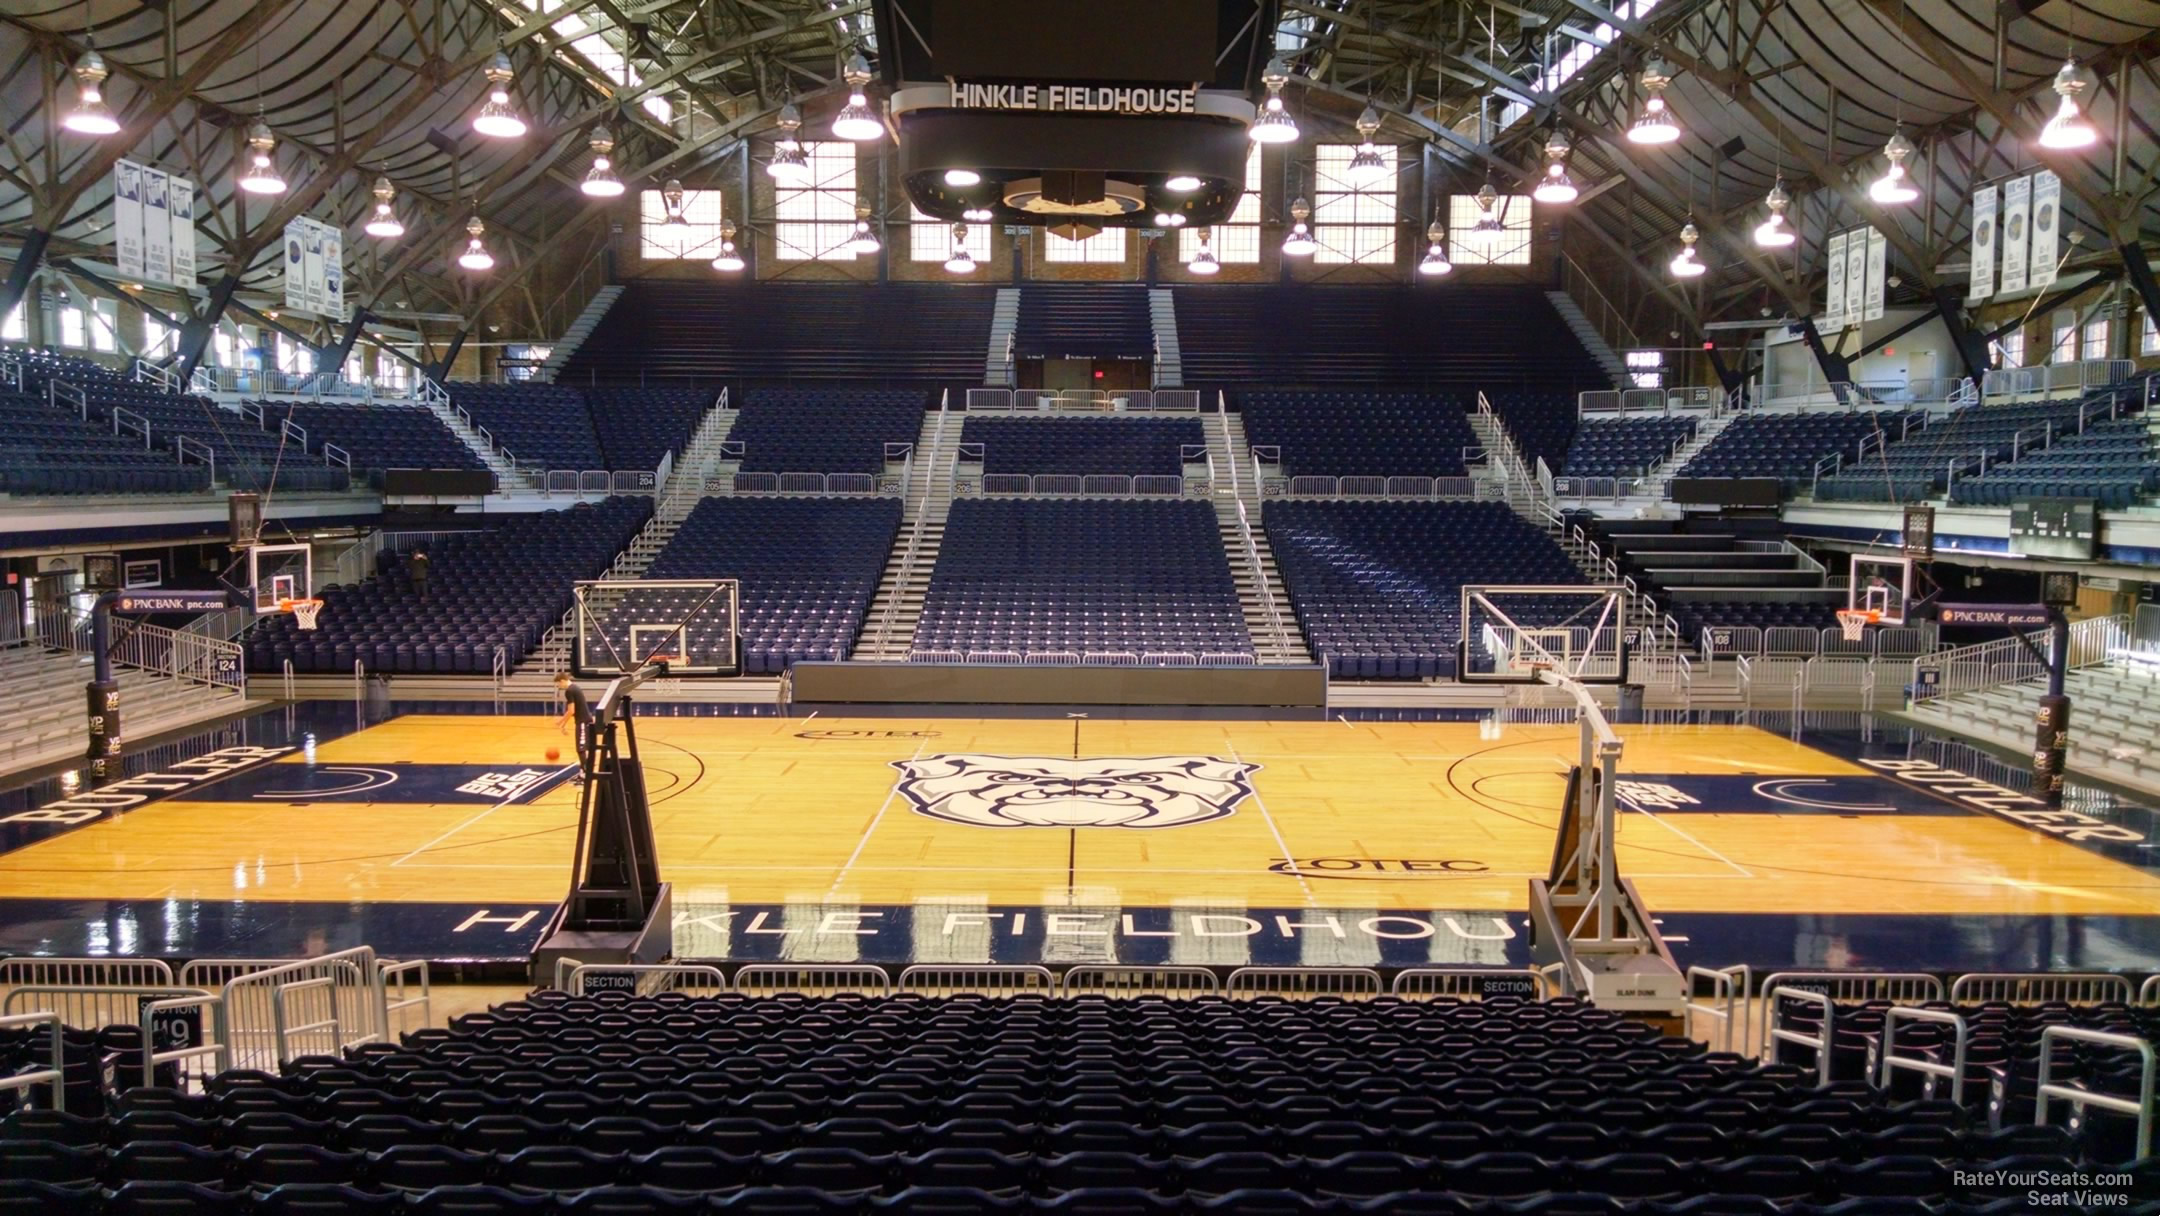 section 118, row 18 seat view  - hinkle fieldhouse